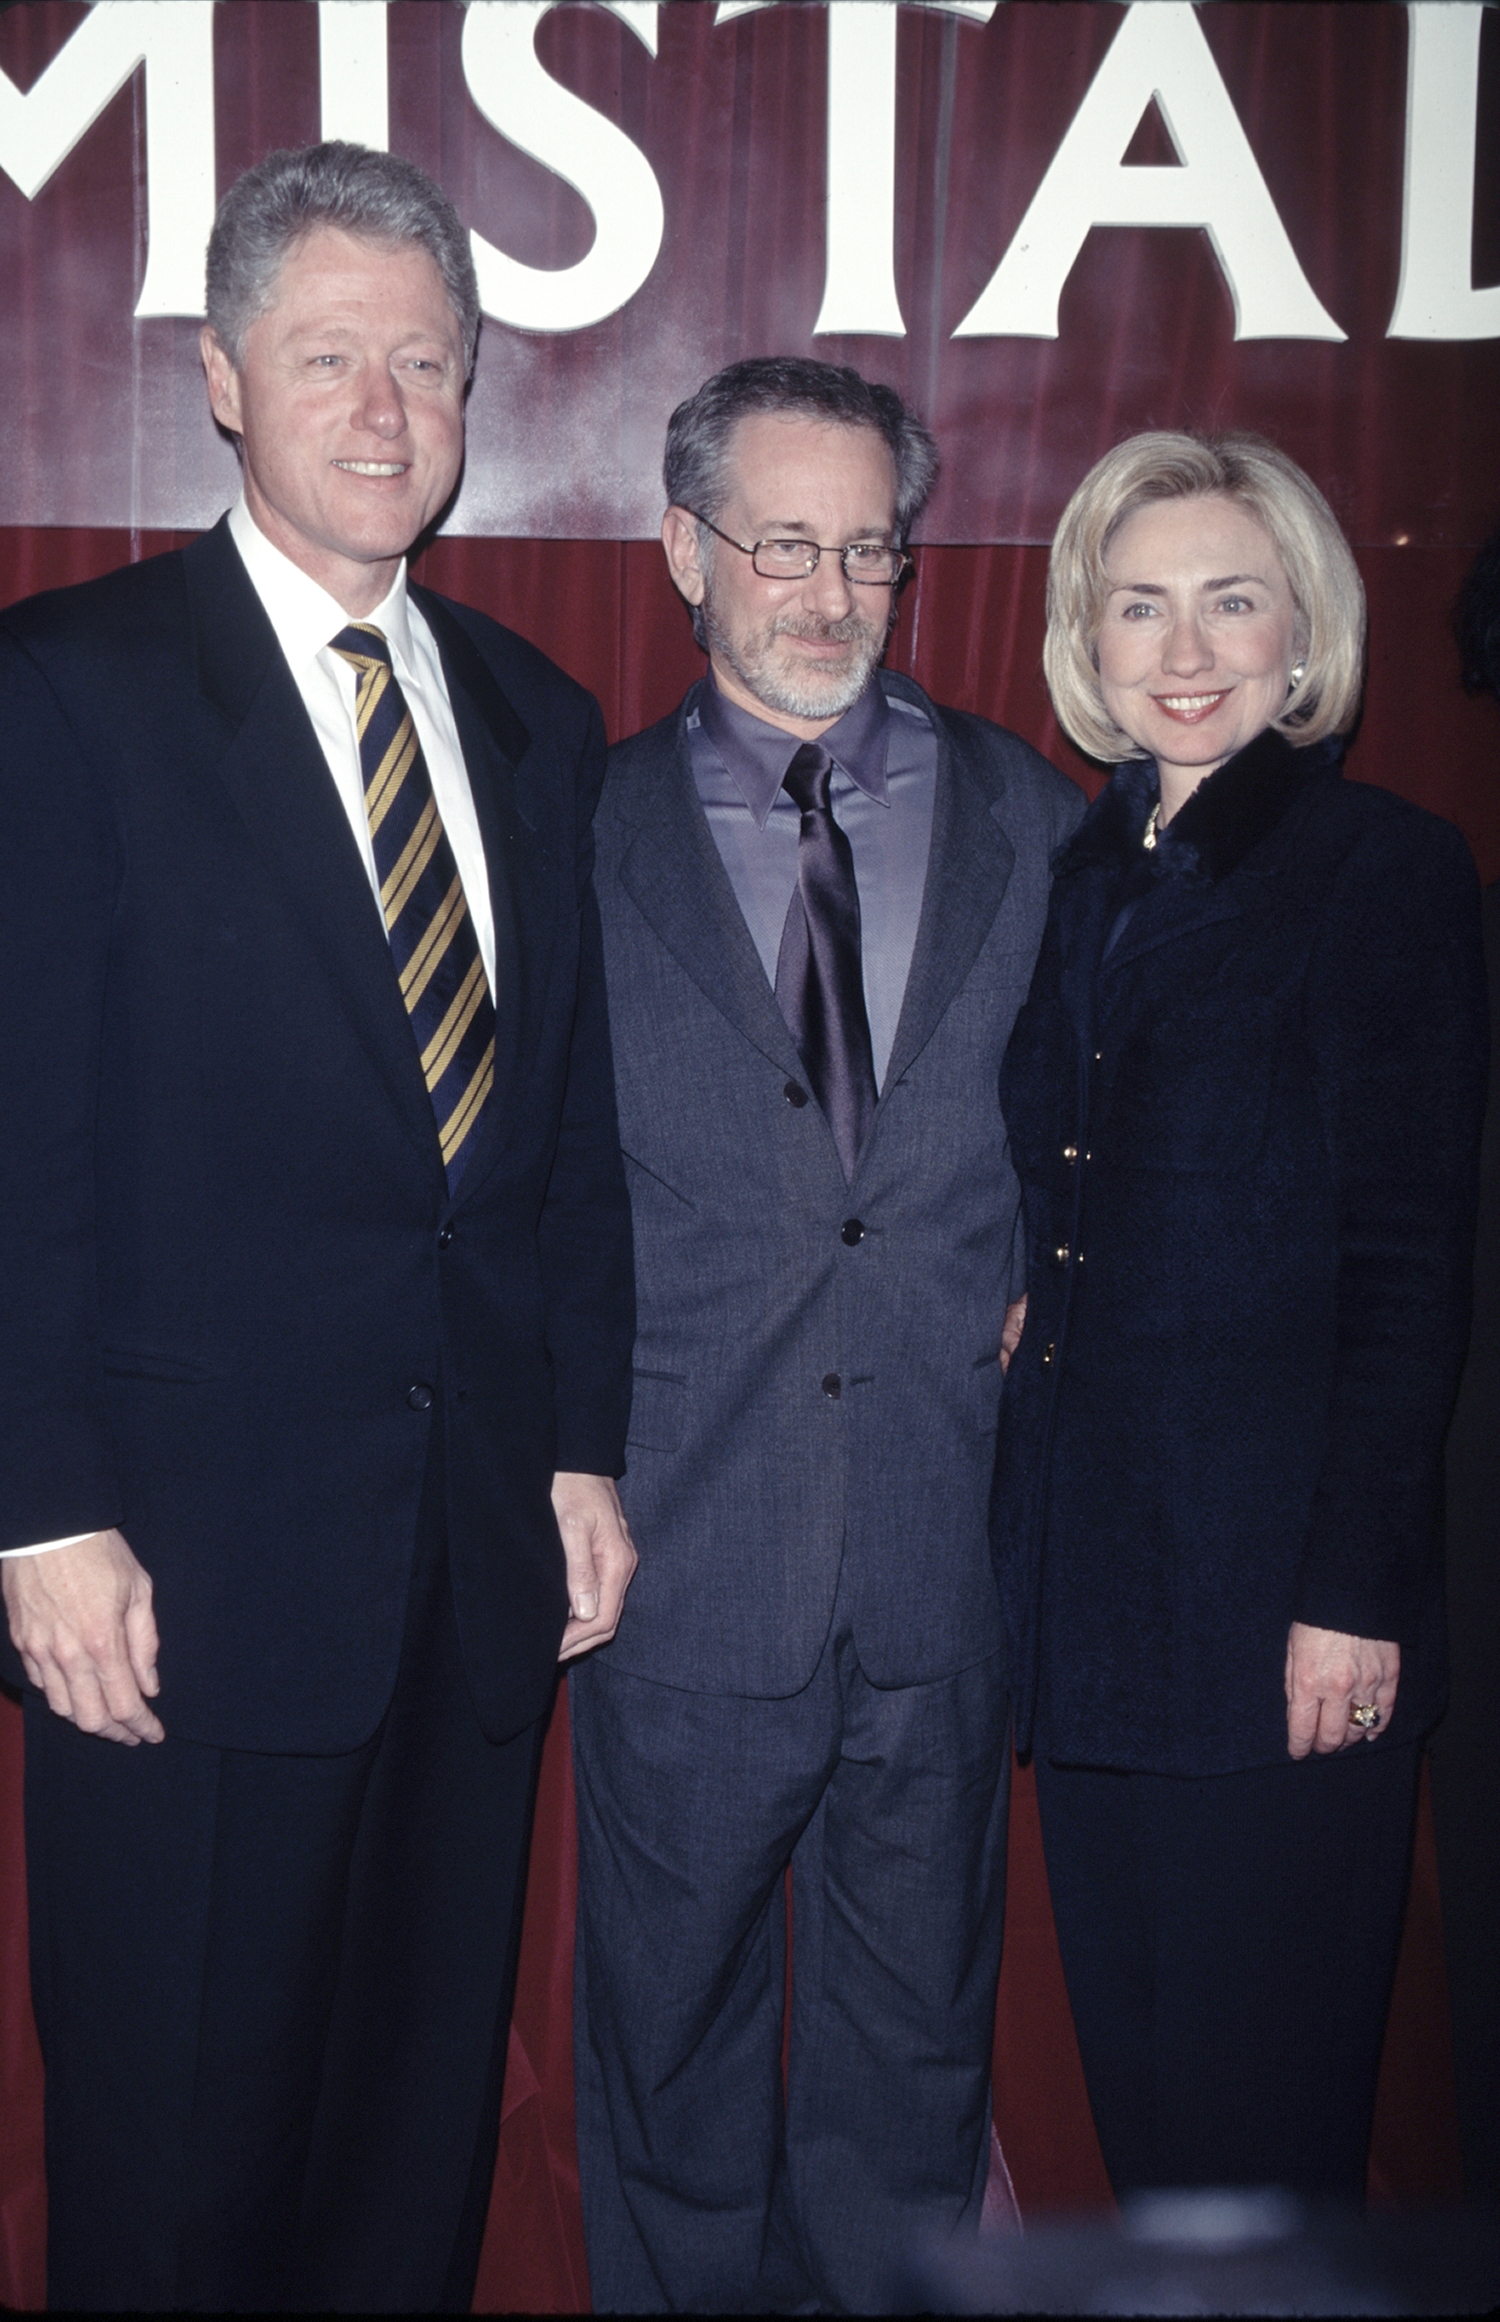 PHOTO: Bill Clinton, Steven Spielberg and Hillary Clinton at the premiere of the film 'Amistad,' Dec. 4, 1997.